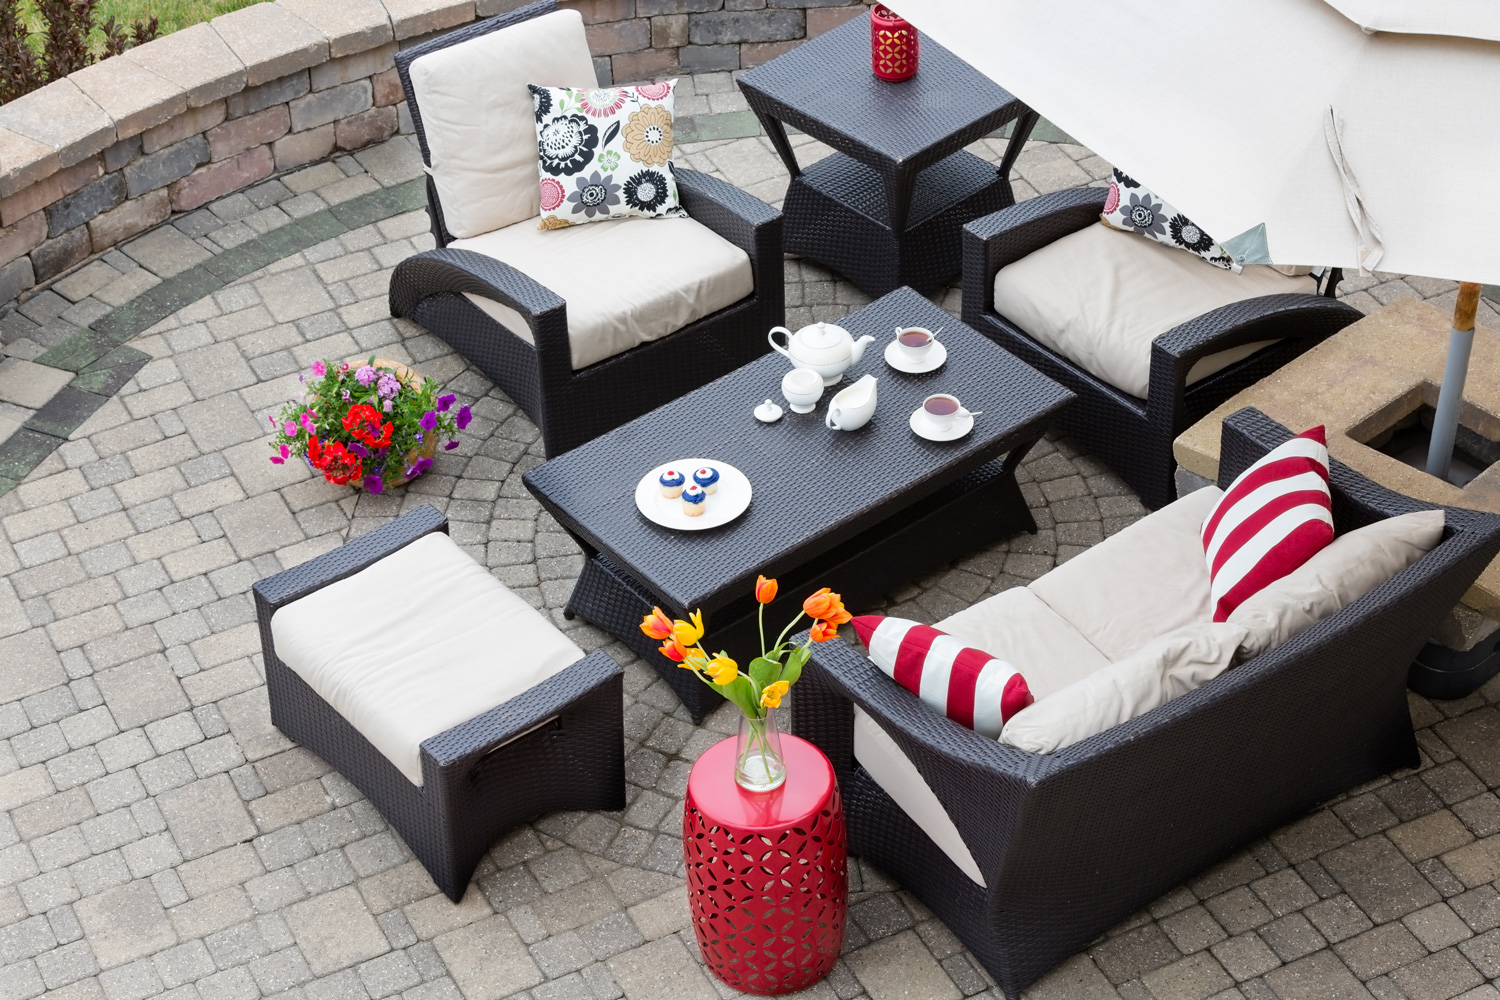 High Angle View of Upscale Patio Set, Dark Wicker Luxury Furniture with Comfortable Cushions on Outdoor Stone Patio of Affluent Home